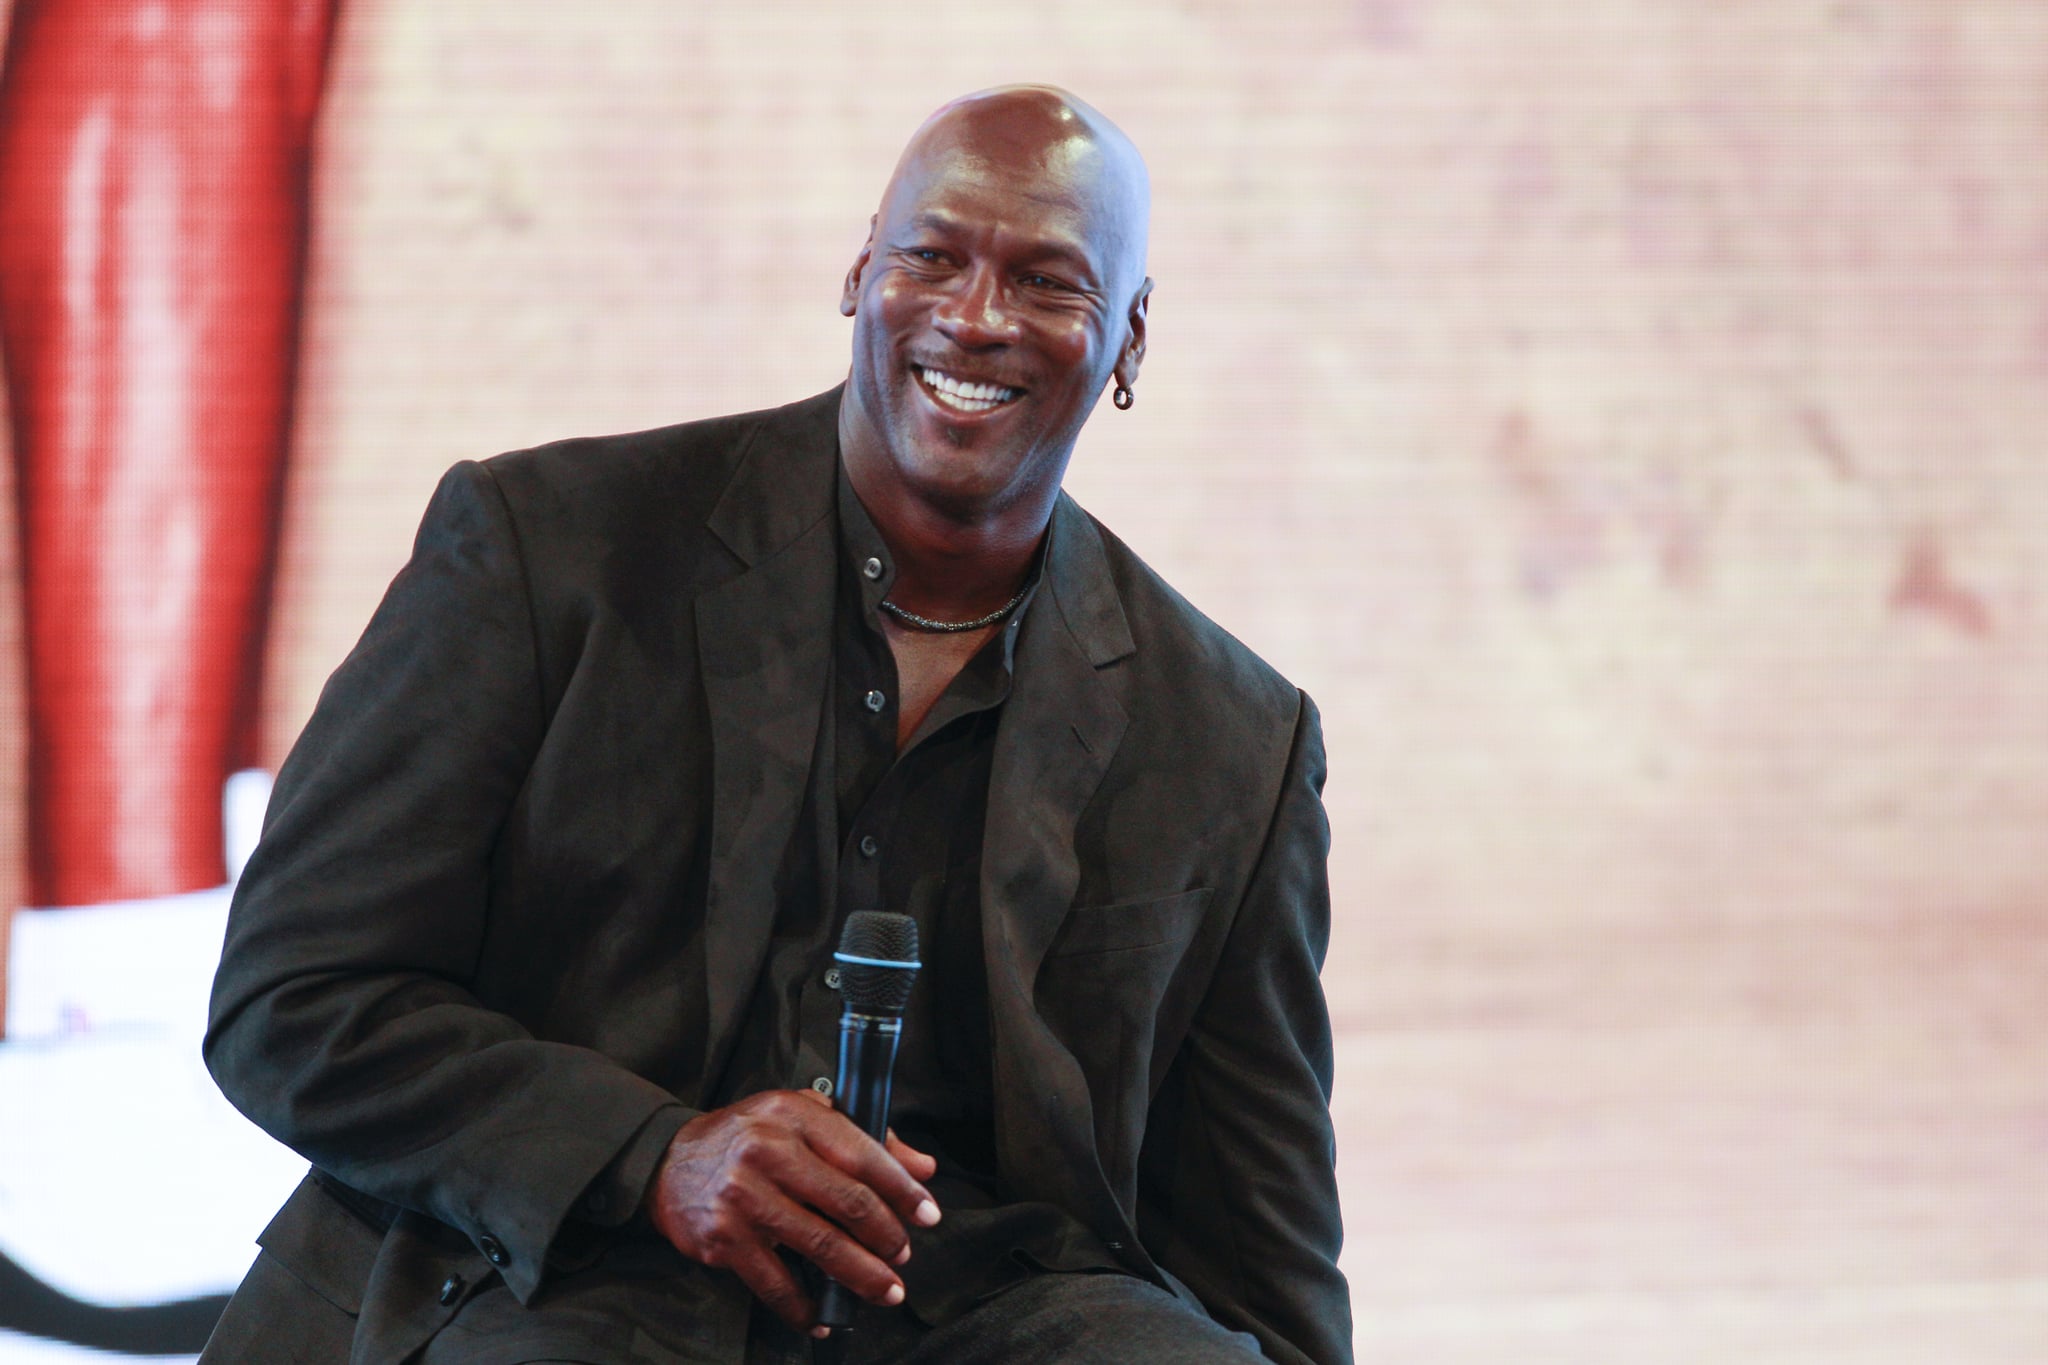 PARIS, FRANCE - JUNE 12: Michael Jordan attends a press conference for the celebration of the 30th anniversary of the Air Jordan Shoe during the 'Palais 23' interactive exhibition dedicated to Michael Jordan at Palais de Tokyo in Paris on June 12, 2015 in Paris, France. (Photo by Catherine Steenkeste/Getty Images)